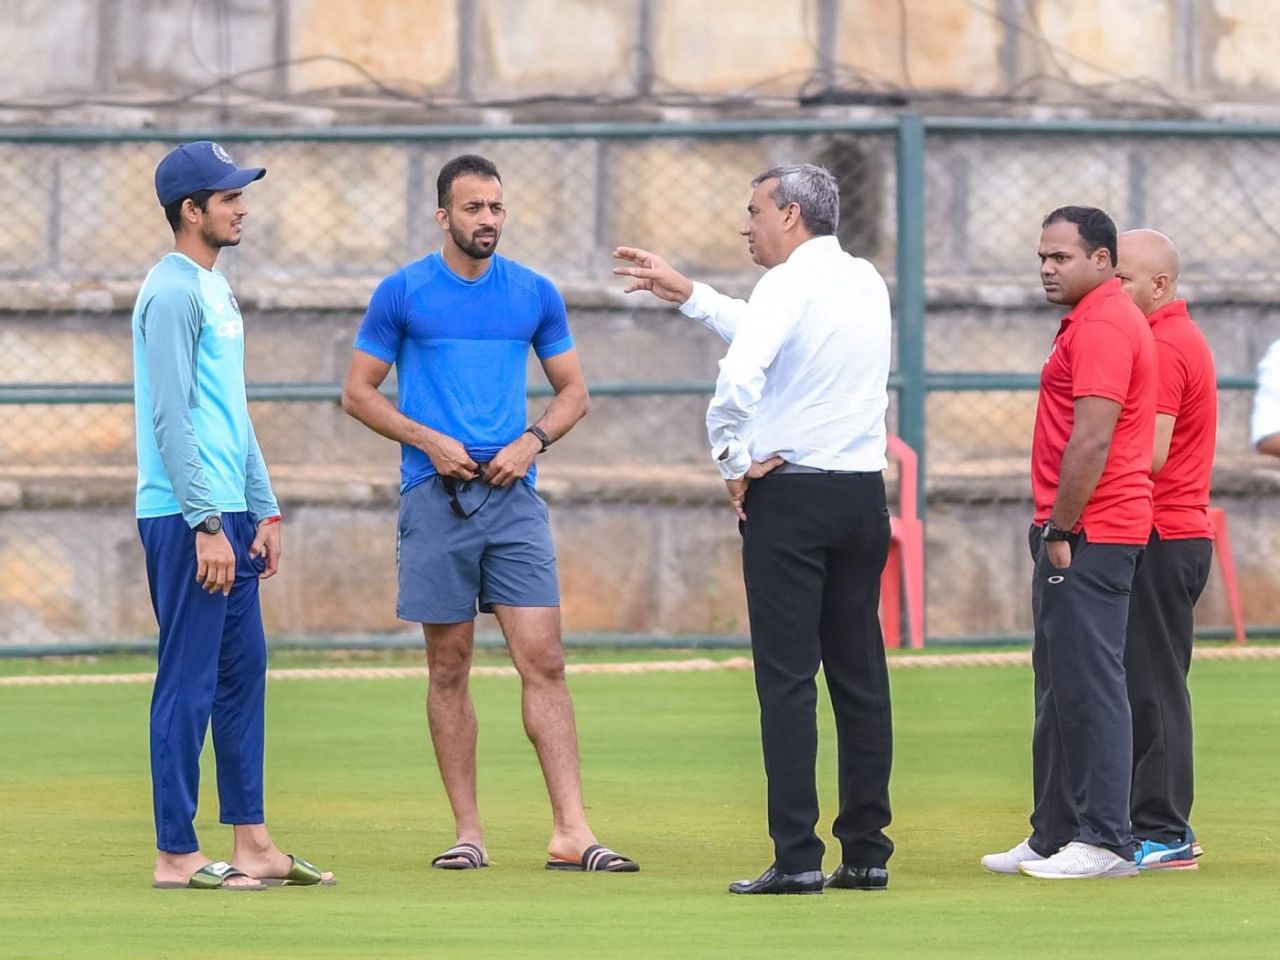 Match referee Sunil Chaturvedi talks to Shubman Gill and Faiz Fazal as Nitin Menon and Virender Sharma look on, India Blue v India Green, Just Cricket Academy Ground, 4th day, August 20, 2019